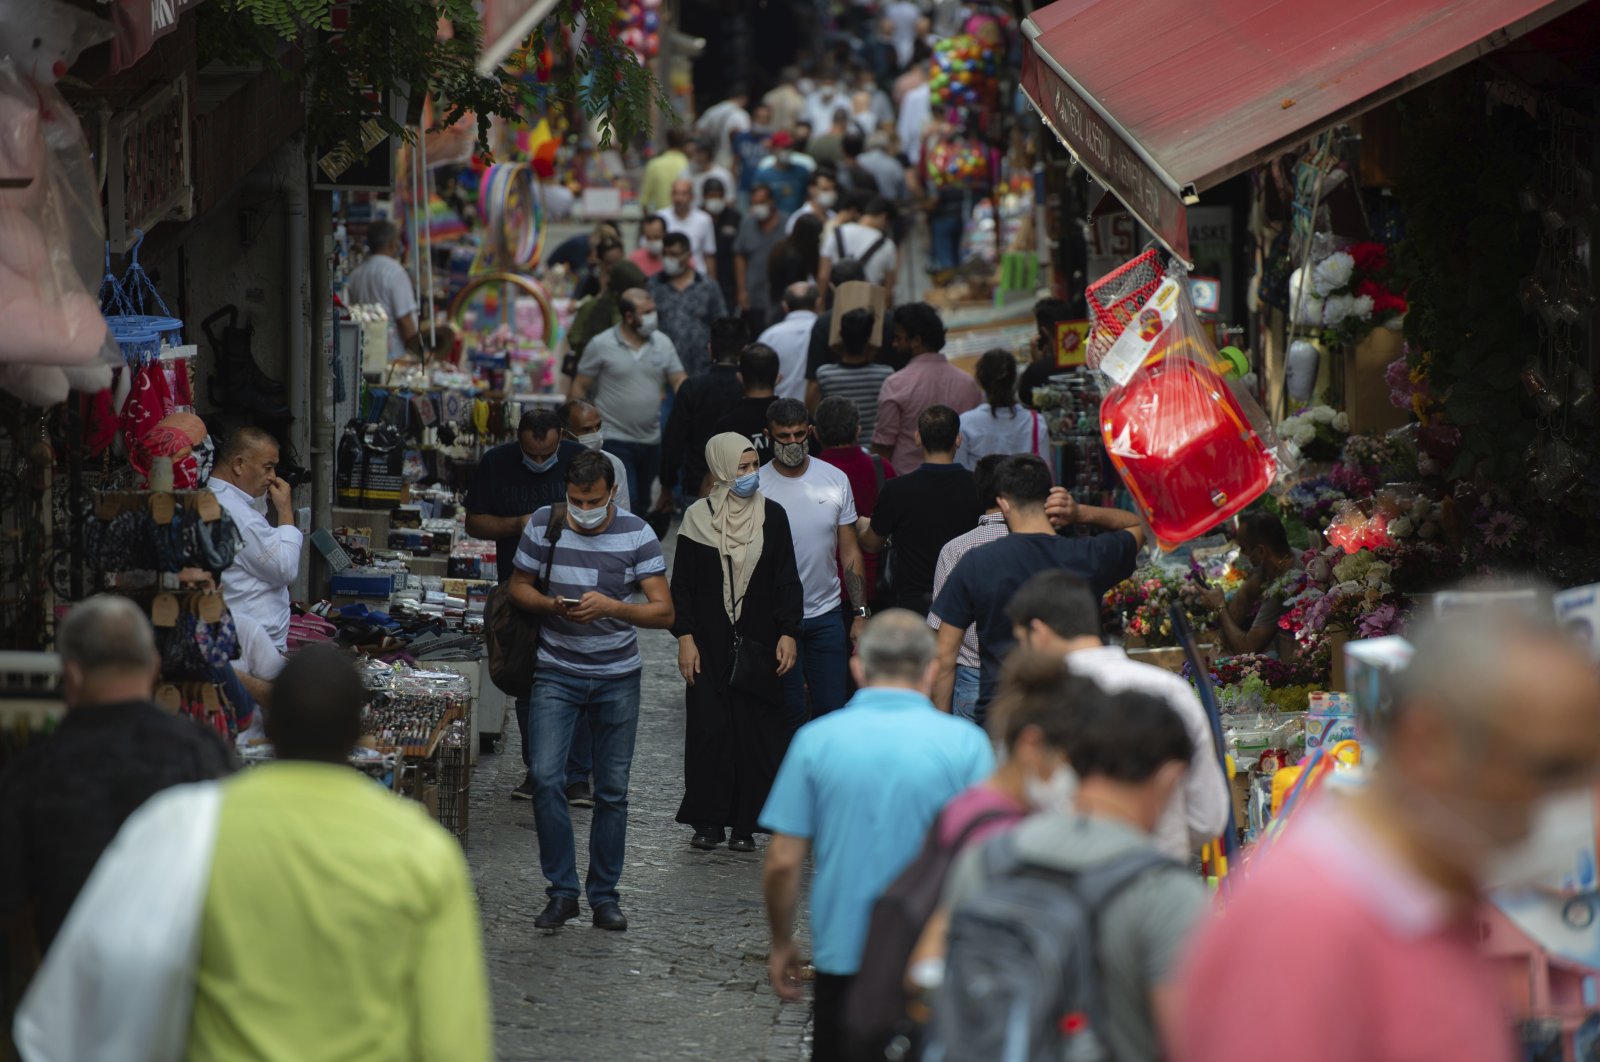 People wearing masks for protection against the spread of coronavirus, walk in a market in Istanbul, Friday, Sept. 11, 2020. (AP Photo)